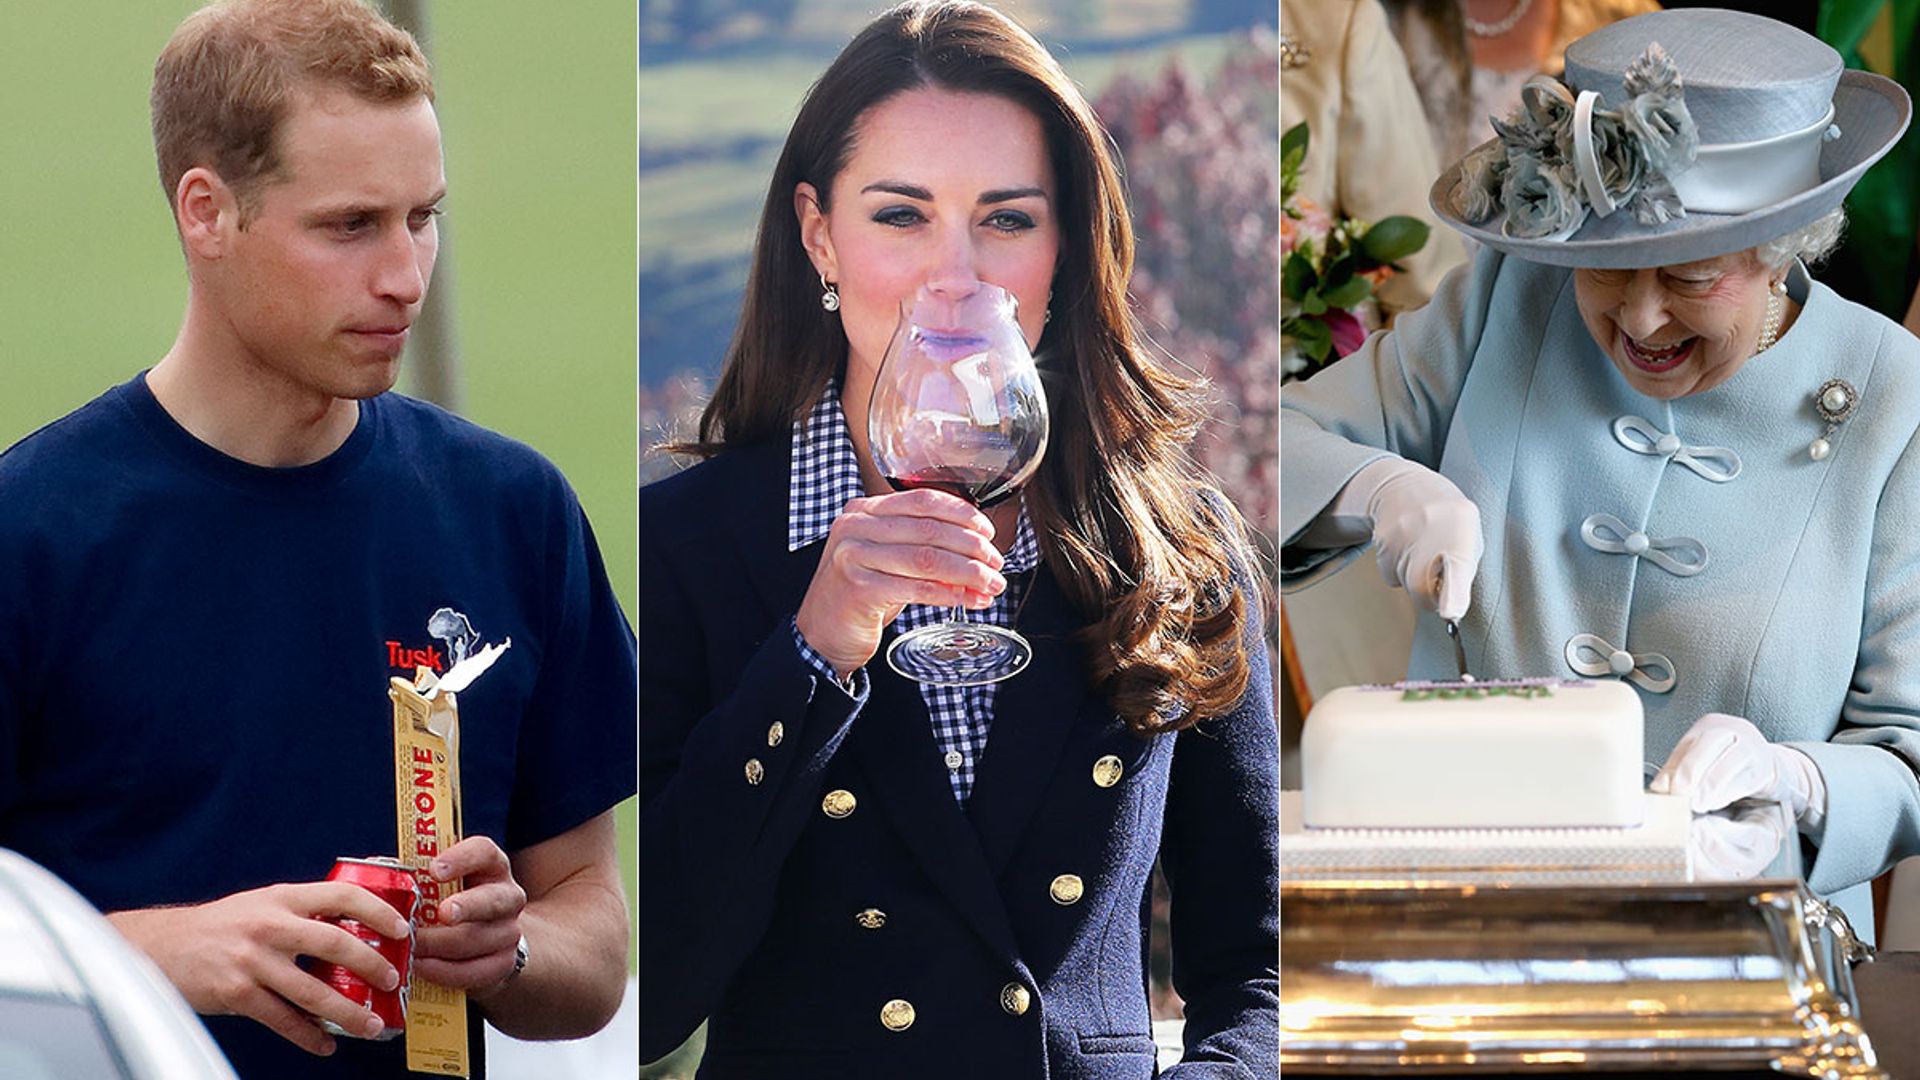 Royal guilty pleasures: from Kate Middleton’s love of takeaways to Prince William’s chocolate habit